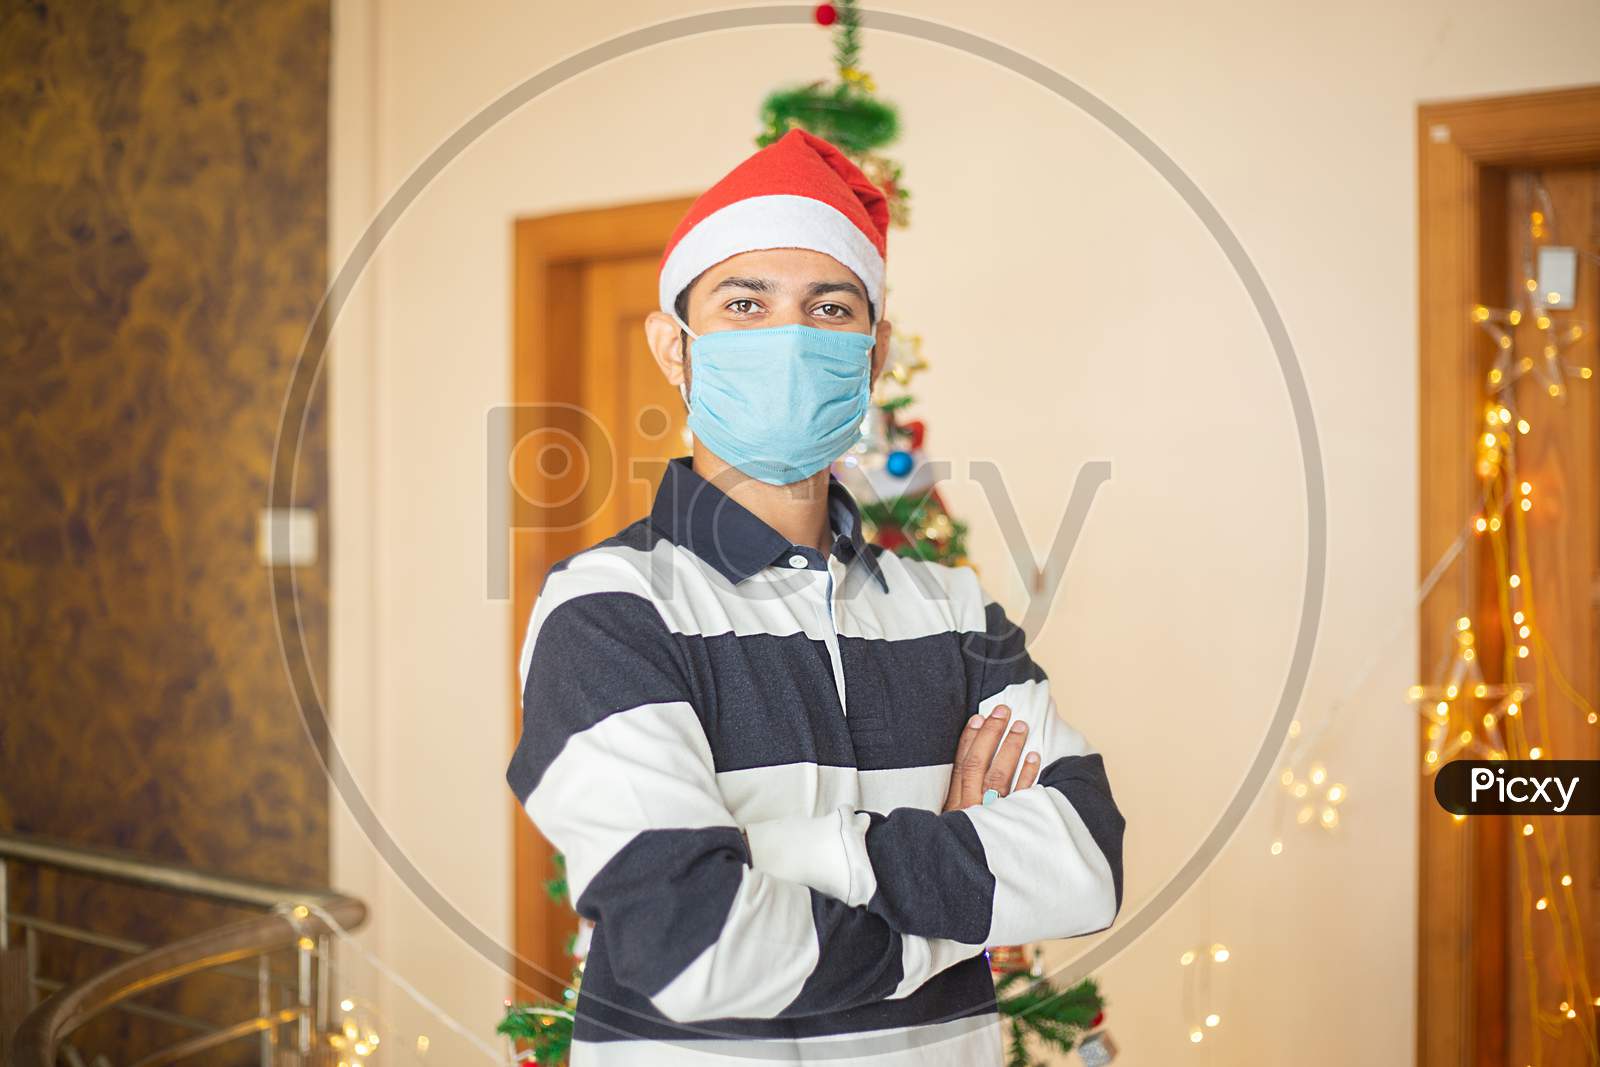 Portrait Of Young Man Wearing Mask And Santa Hat Standing Cross Arm, Christmas Celebration Holiday Concept, Covid-19 Pandemic.